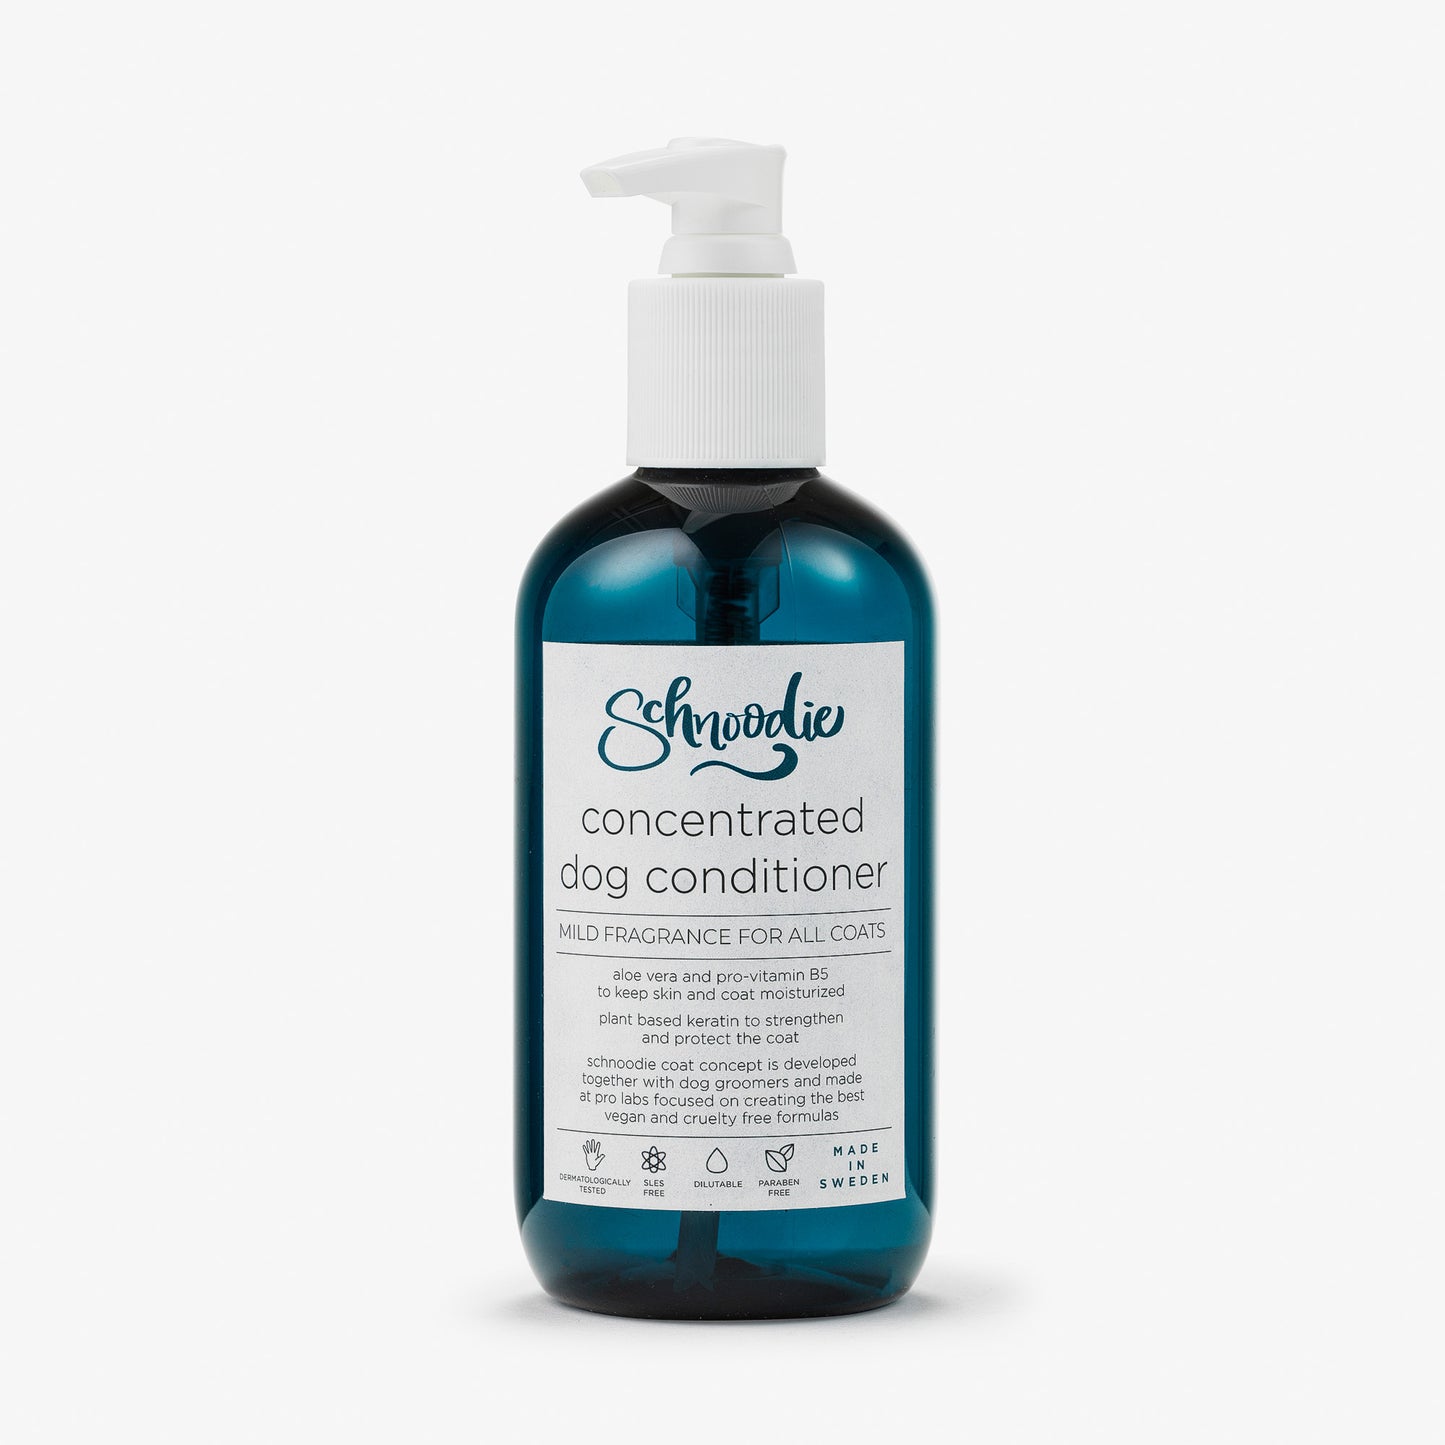 Dog Conditioner - concentrated and mildly perfumed conditioner